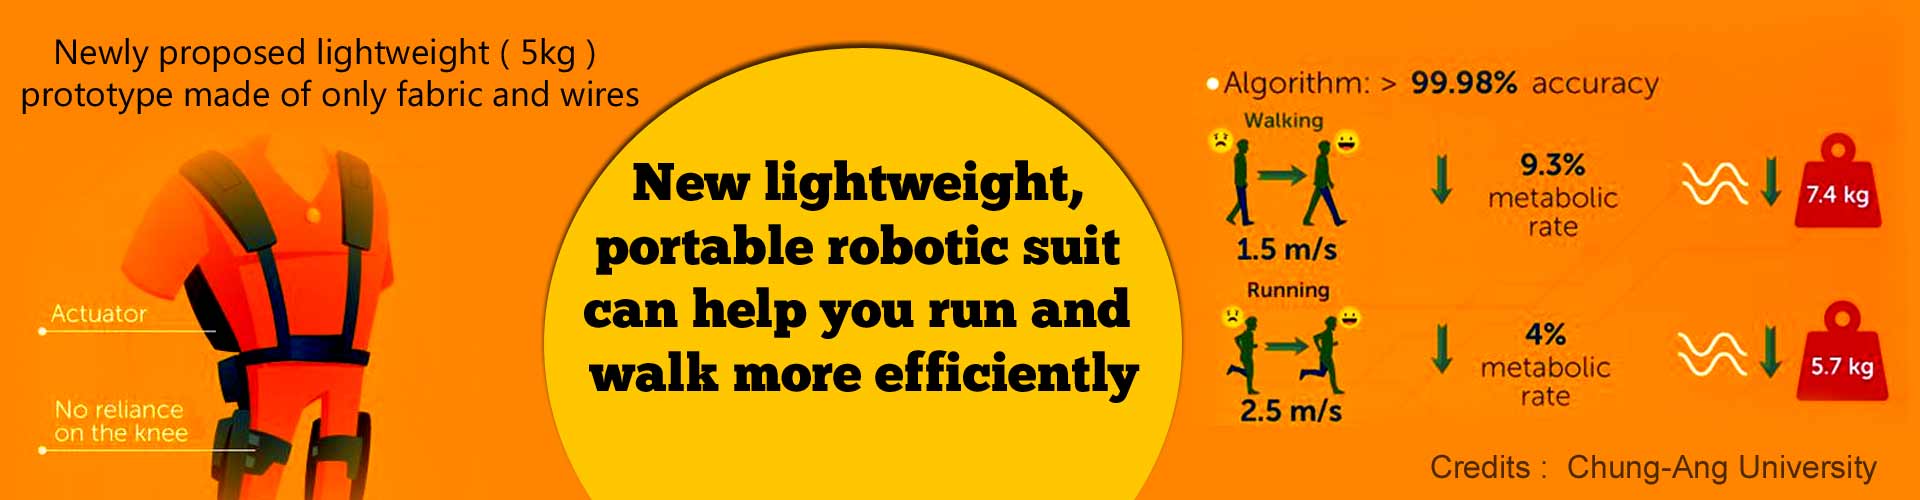 New lightweight, portable robotic suit can help you run and walk more efficiently. 